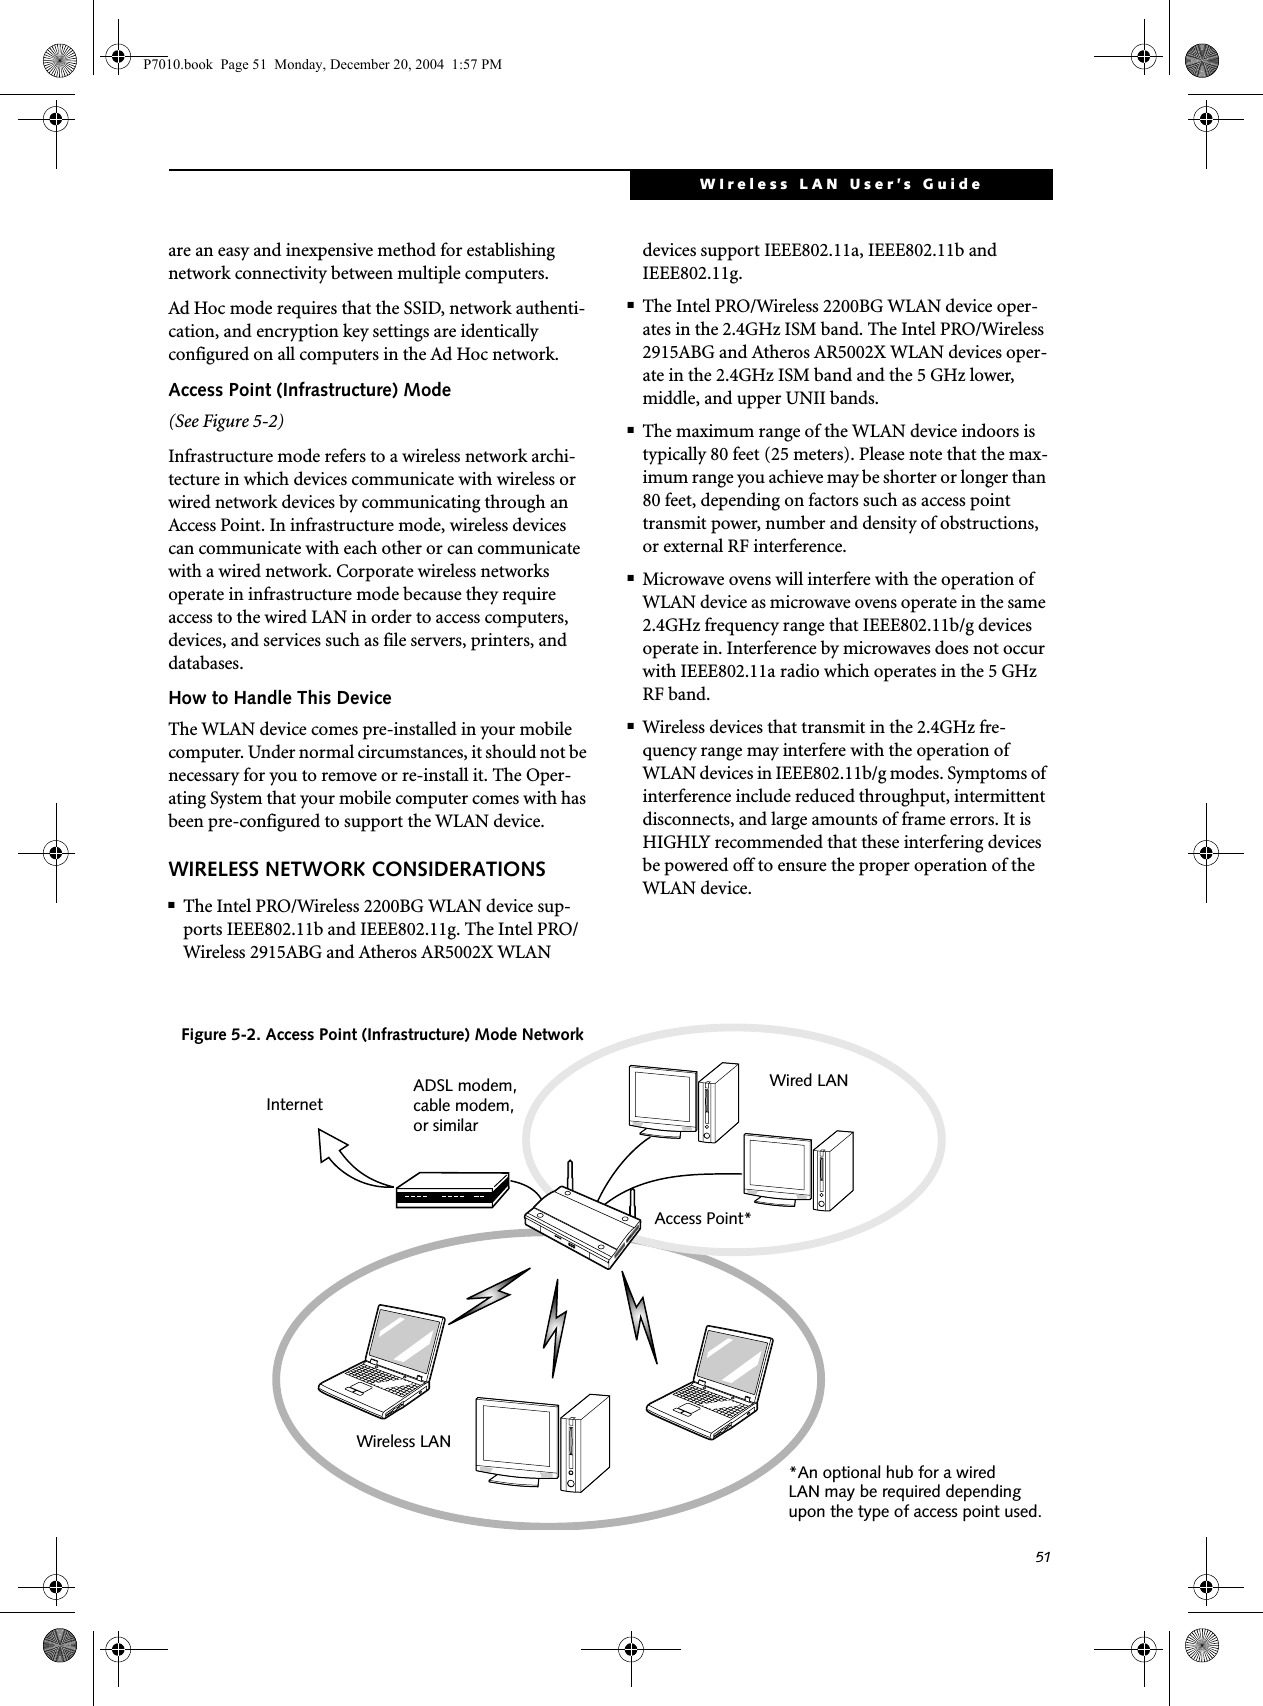 51WIreless LAN User’s Guide are an easy and inexpensive method for establishing network connectivity between multiple computers.Ad Hoc mode requires that the SSID, network authenti-cation, and encryption key settings are identically configured on all computers in the Ad Hoc network. Access Point (Infrastructure) Mode (See Figure 5-2)Infrastructure mode refers to a wireless network archi-tecture in which devices communicate with wireless or wired network devices by communicating through an Access Point. In infrastructure mode, wireless devices can communicate with each other or can communicate with a wired network. Corporate wireless networks operate in infrastructure mode because they require access to the wired LAN in order to access computers, devices, and services such as file servers, printers, and databases.How to Handle This DeviceThe WLAN device comes pre-installed in your mobile computer. Under normal circumstances, it should not be necessary for you to remove or re-install it. The Oper-ating System that your mobile computer comes with has been pre-configured to support the WLAN device. WIRELESS NETWORK CONSIDERATIONS■The Intel PRO/Wireless 2200BG WLAN device sup-ports IEEE802.11b and IEEE802.11g. The Intel PRO/Wireless 2915ABG and Atheros AR5002X WLAN devices support IEEE802.11a, IEEE802.11b and IEEE802.11g.■The Intel PRO/Wireless 2200BG WLAN device oper-ates in the 2.4GHz ISM band. The Intel PRO/Wireless 2915ABG and Atheros AR5002X WLAN devices oper-ate in the 2.4GHz ISM band and the 5 GHz lower, middle, and upper UNII bands.■The maximum range of the WLAN device indoors is typically 80 feet (25 meters). Please note that the max-imum range you achieve may be shorter or longer than 80 feet, depending on factors such as access point transmit power, number and density of obstructions, or external RF interference.■Microwave ovens will interfere with the operation of WLAN device as microwave ovens operate in the same 2.4GHz frequency range that IEEE802.11b/g devices operate in. Interference by microwaves does not occur with IEEE802.11a radio which operates in the 5 GHz RF band.■Wireless devices that transmit in the 2.4GHz fre-quency range may interfere with the operation of WLAN devices in IEEE802.11b/g modes. Symptoms of interference include reduced throughput, intermittent disconnects, and large amounts of frame errors. It is HIGHLY recommended that these interfering devices be powered off to ensure the proper operation of the WLAN device.Figure 5-2. Access Point (Infrastructure) Mode NetworkADSL modem,cable modem,or similarInternetWired LANAccess Point*Wireless LAN*An optional hub for a wiredLAN may be required dependingupon the type of access point used.P7010.book  Page 51  Monday, December 20, 2004  1:57 PM